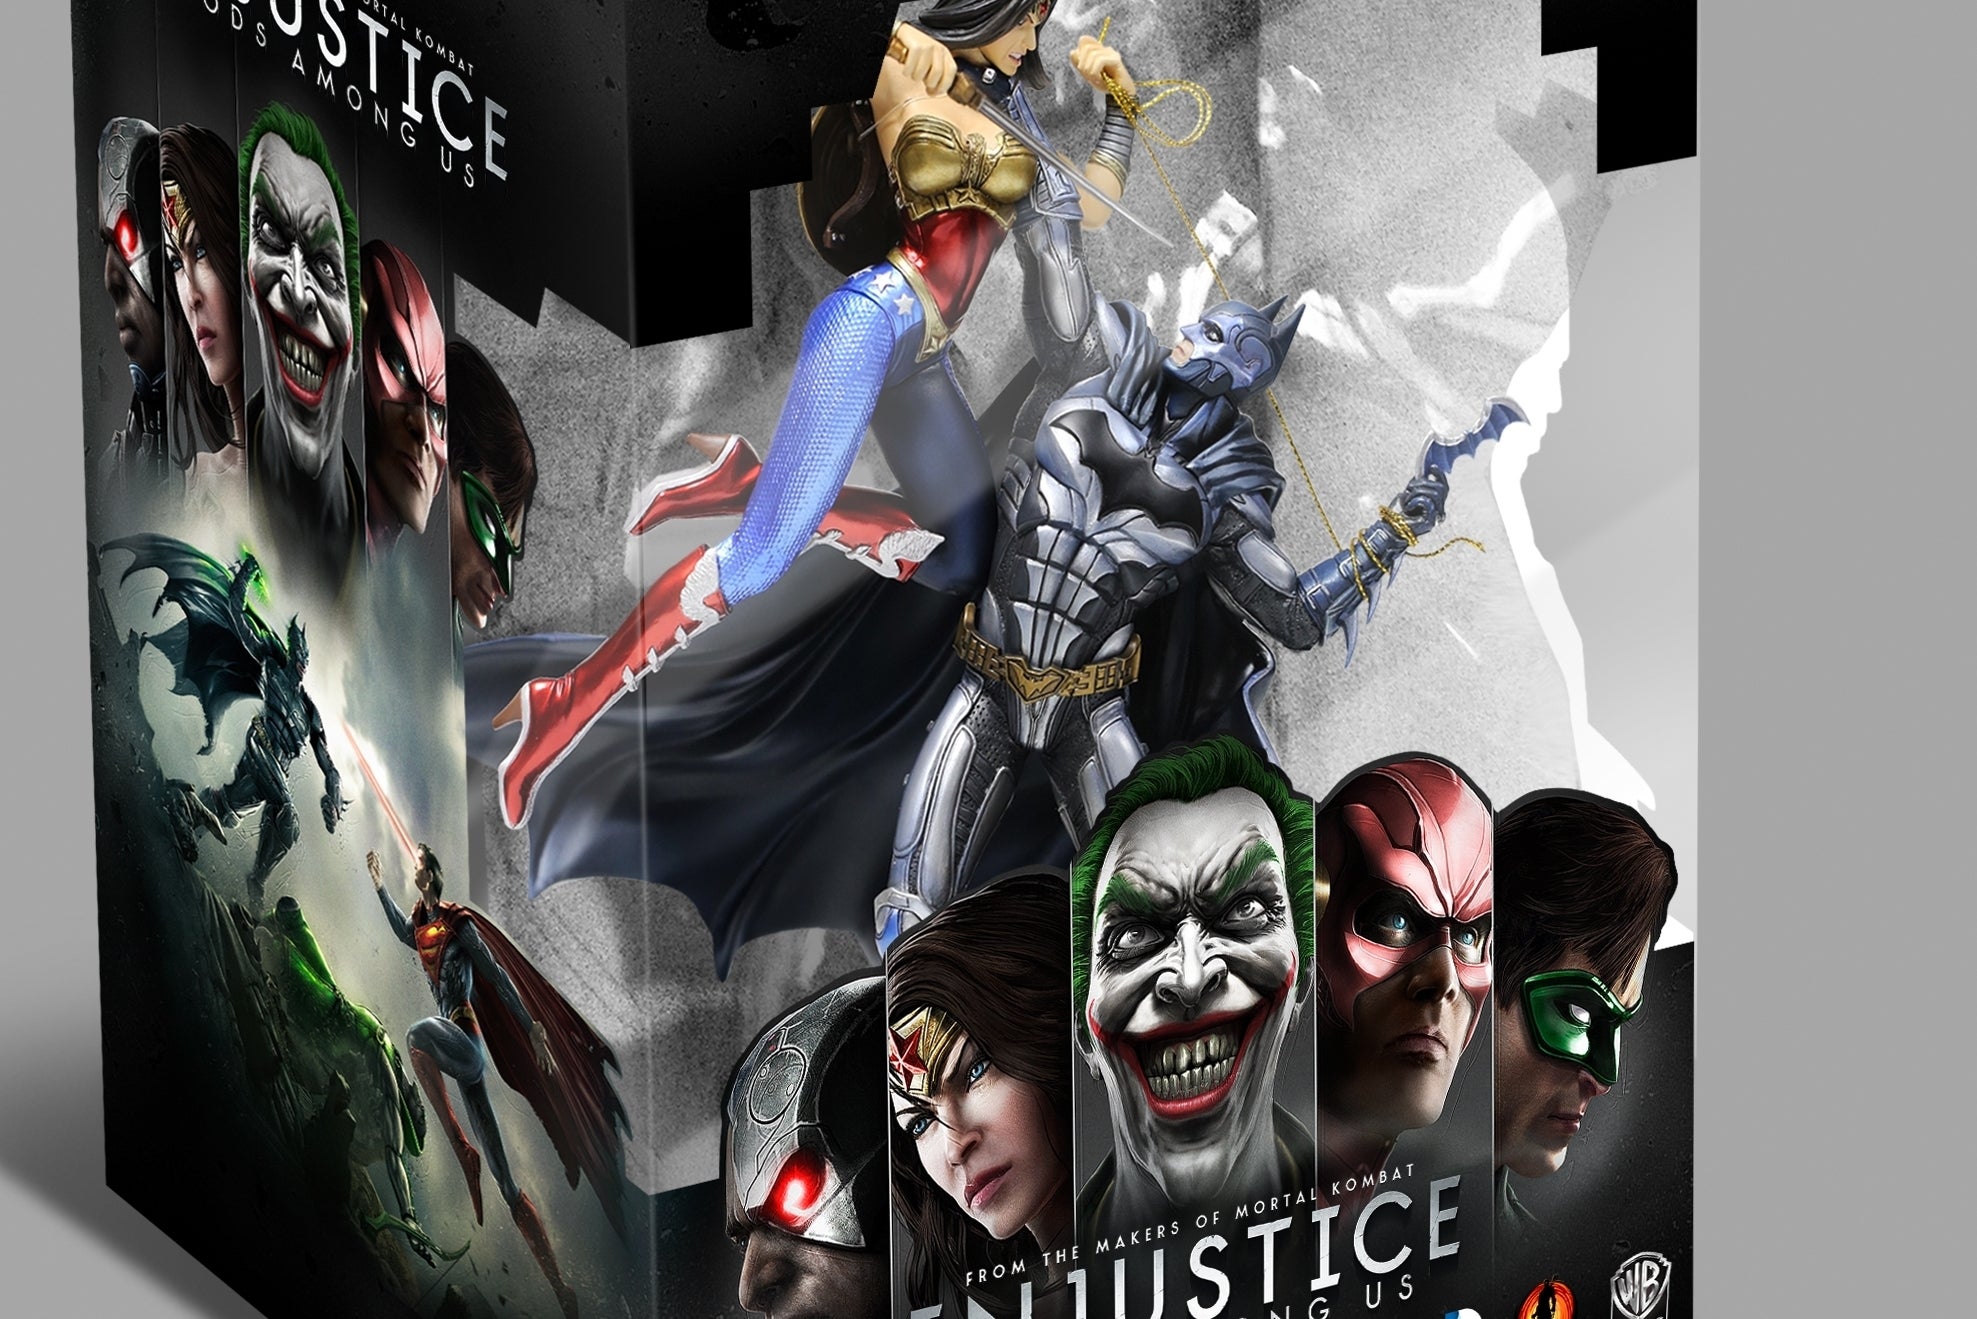 Injustice: Gods Among Us release date 19th April 